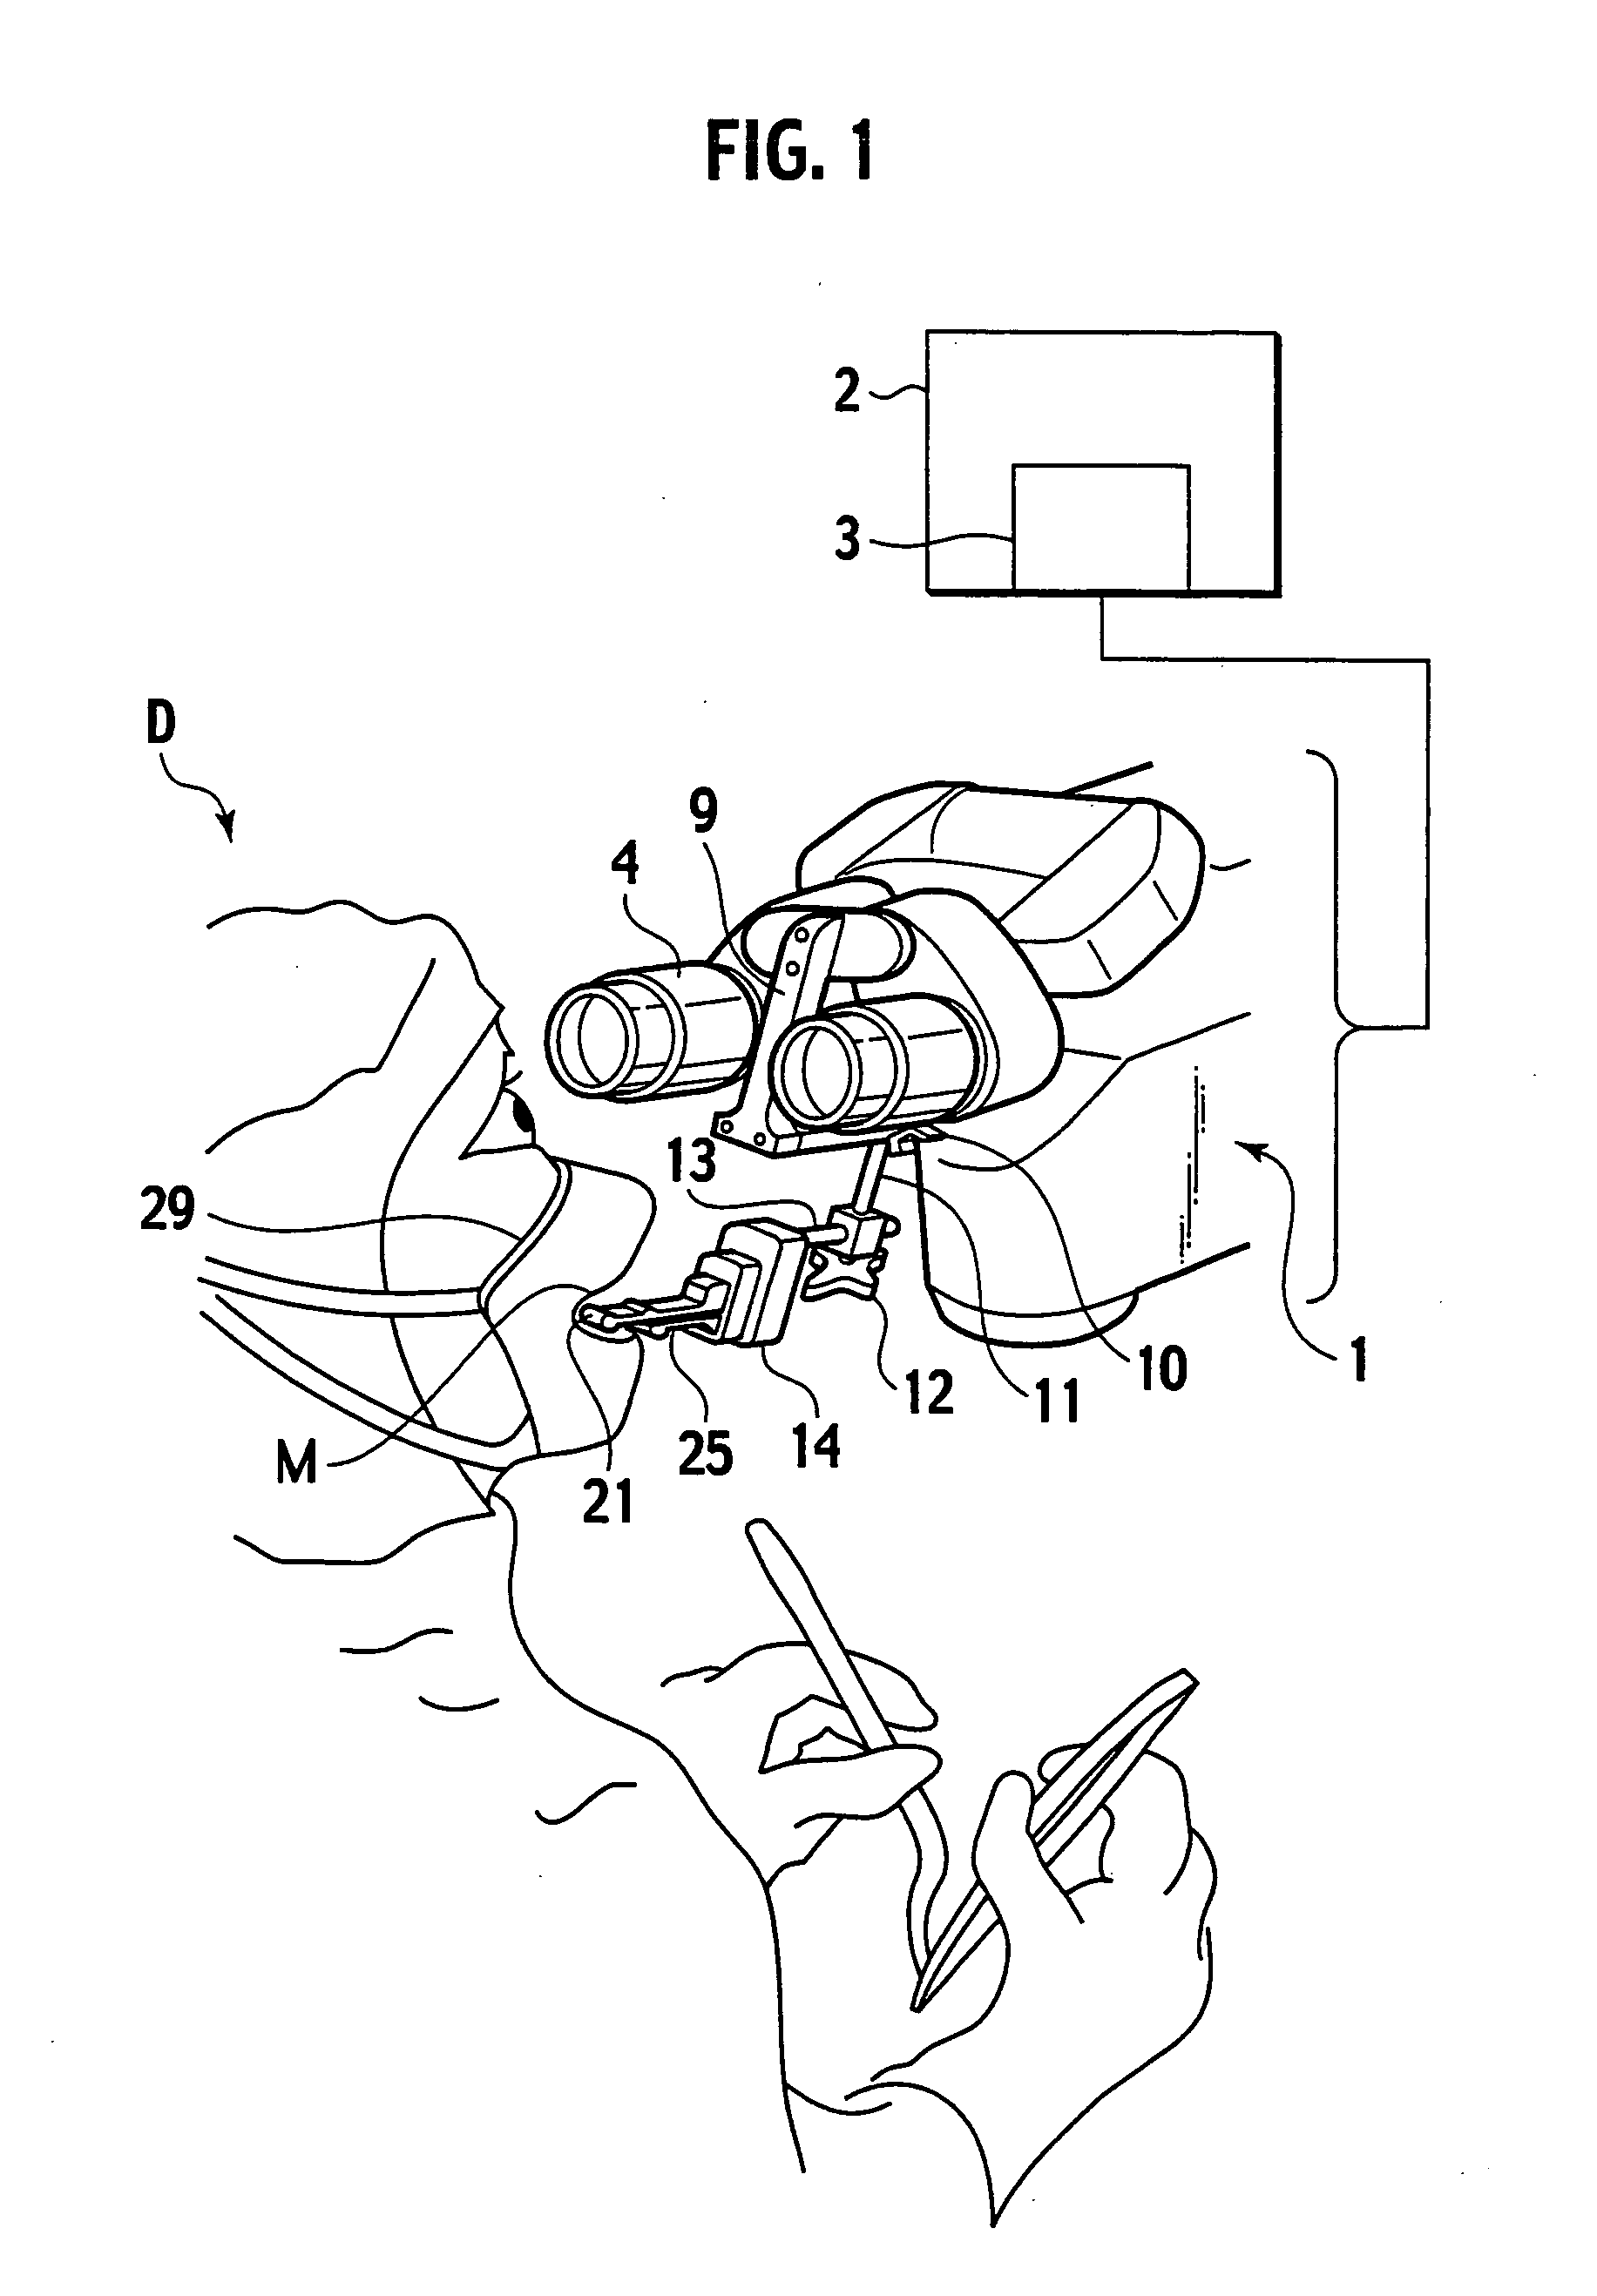 Mouth Switch Mechanism for Operation Microscope